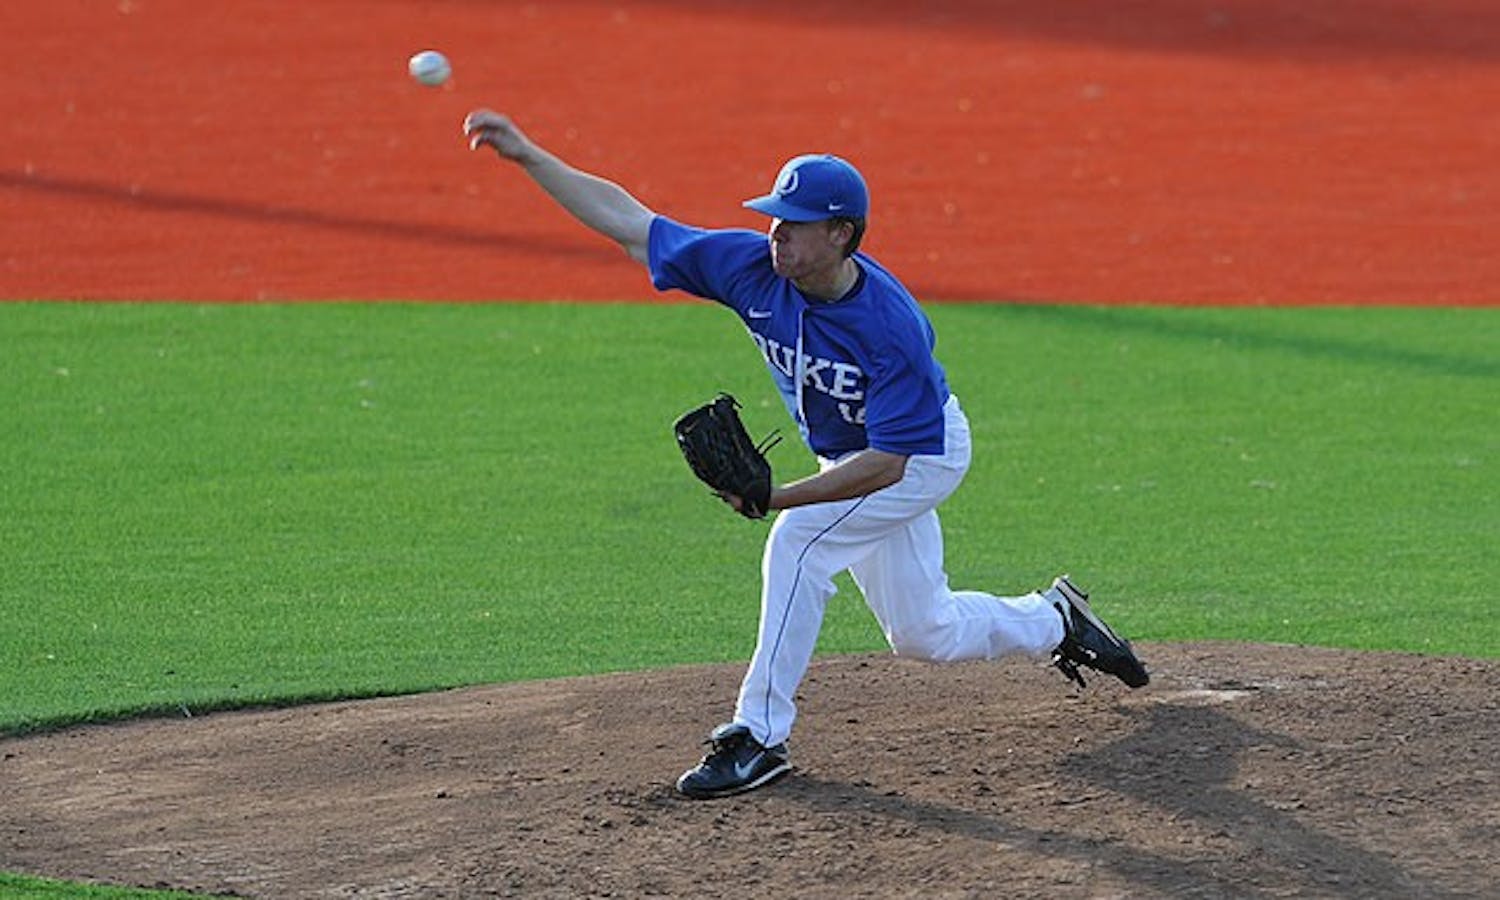 Freshman Robert Huber pitched six shutout innings in only his second career start as Duke held off Wofford 7-5 Tuesday night at Jack Coombs Field.